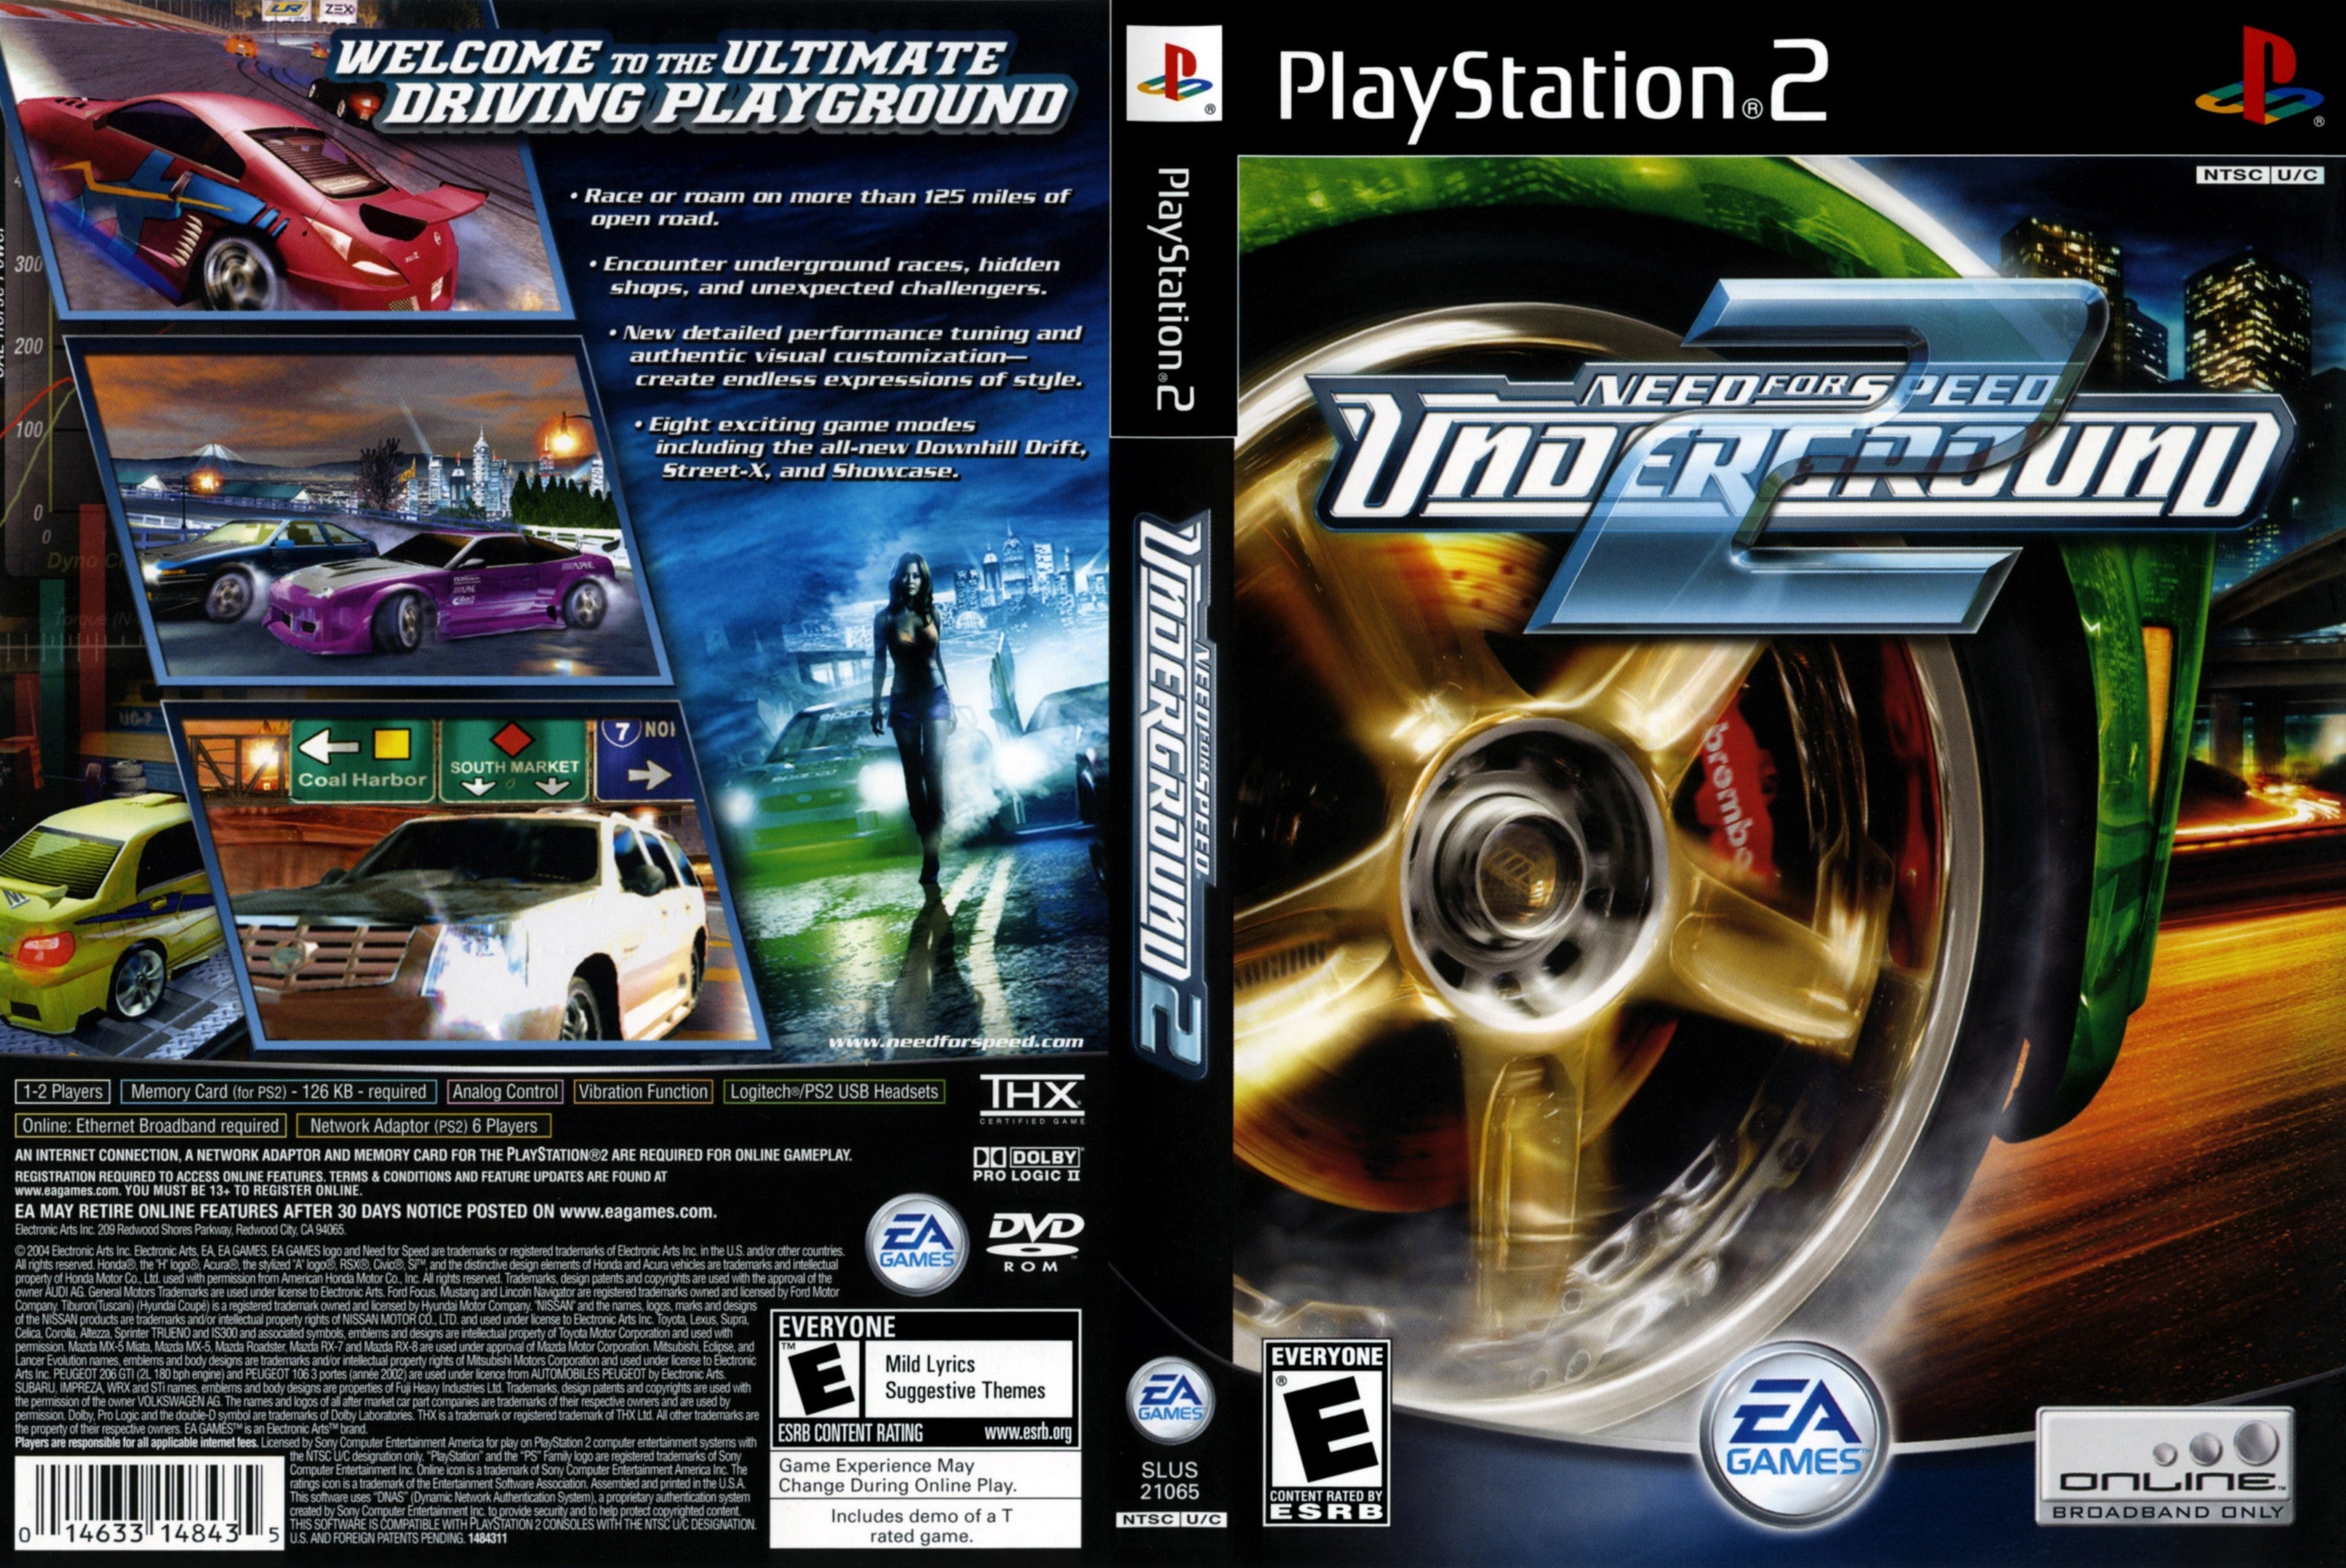 Buy Need for Speed: Underground 2 for PS2